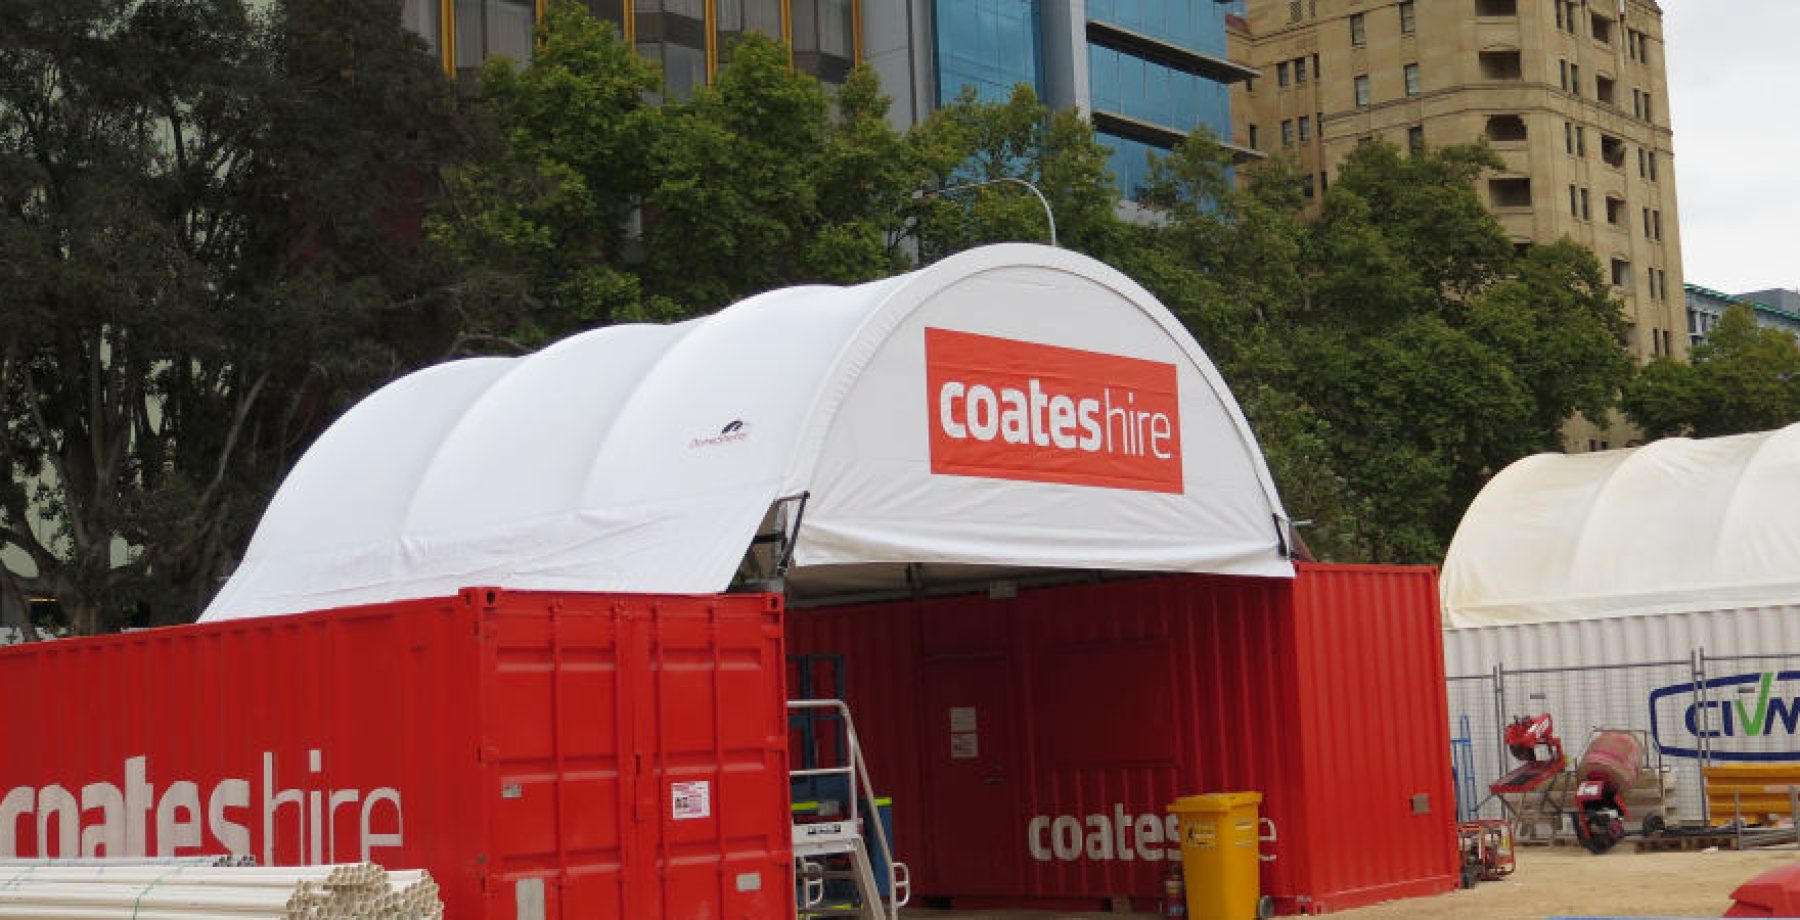 Mini DomeShelter™ Container model used as a Workshop by Coates Hire.